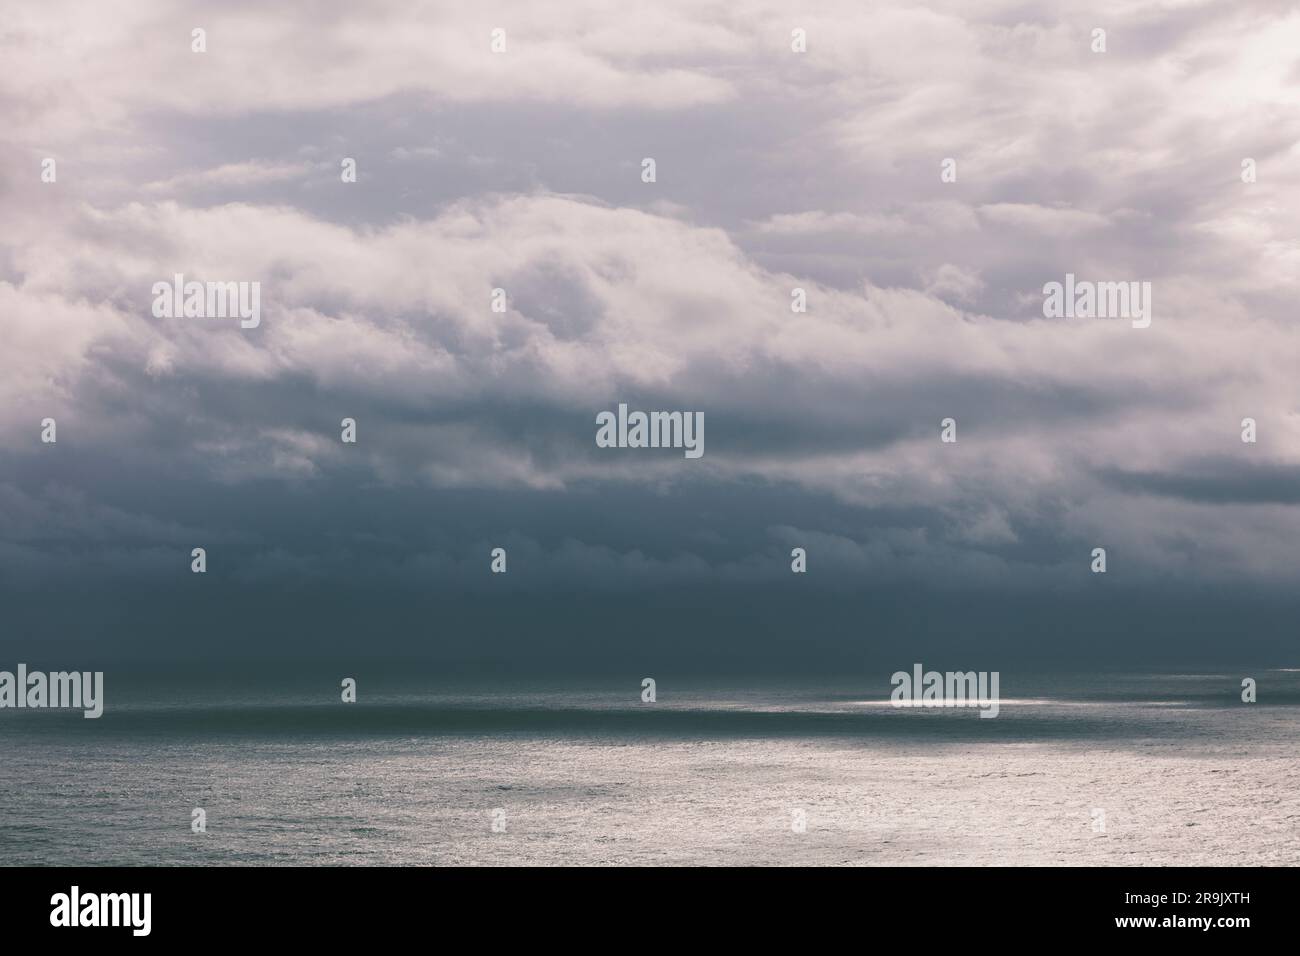 Storm clouds over the Pacific ocean at dusk Stock Photo